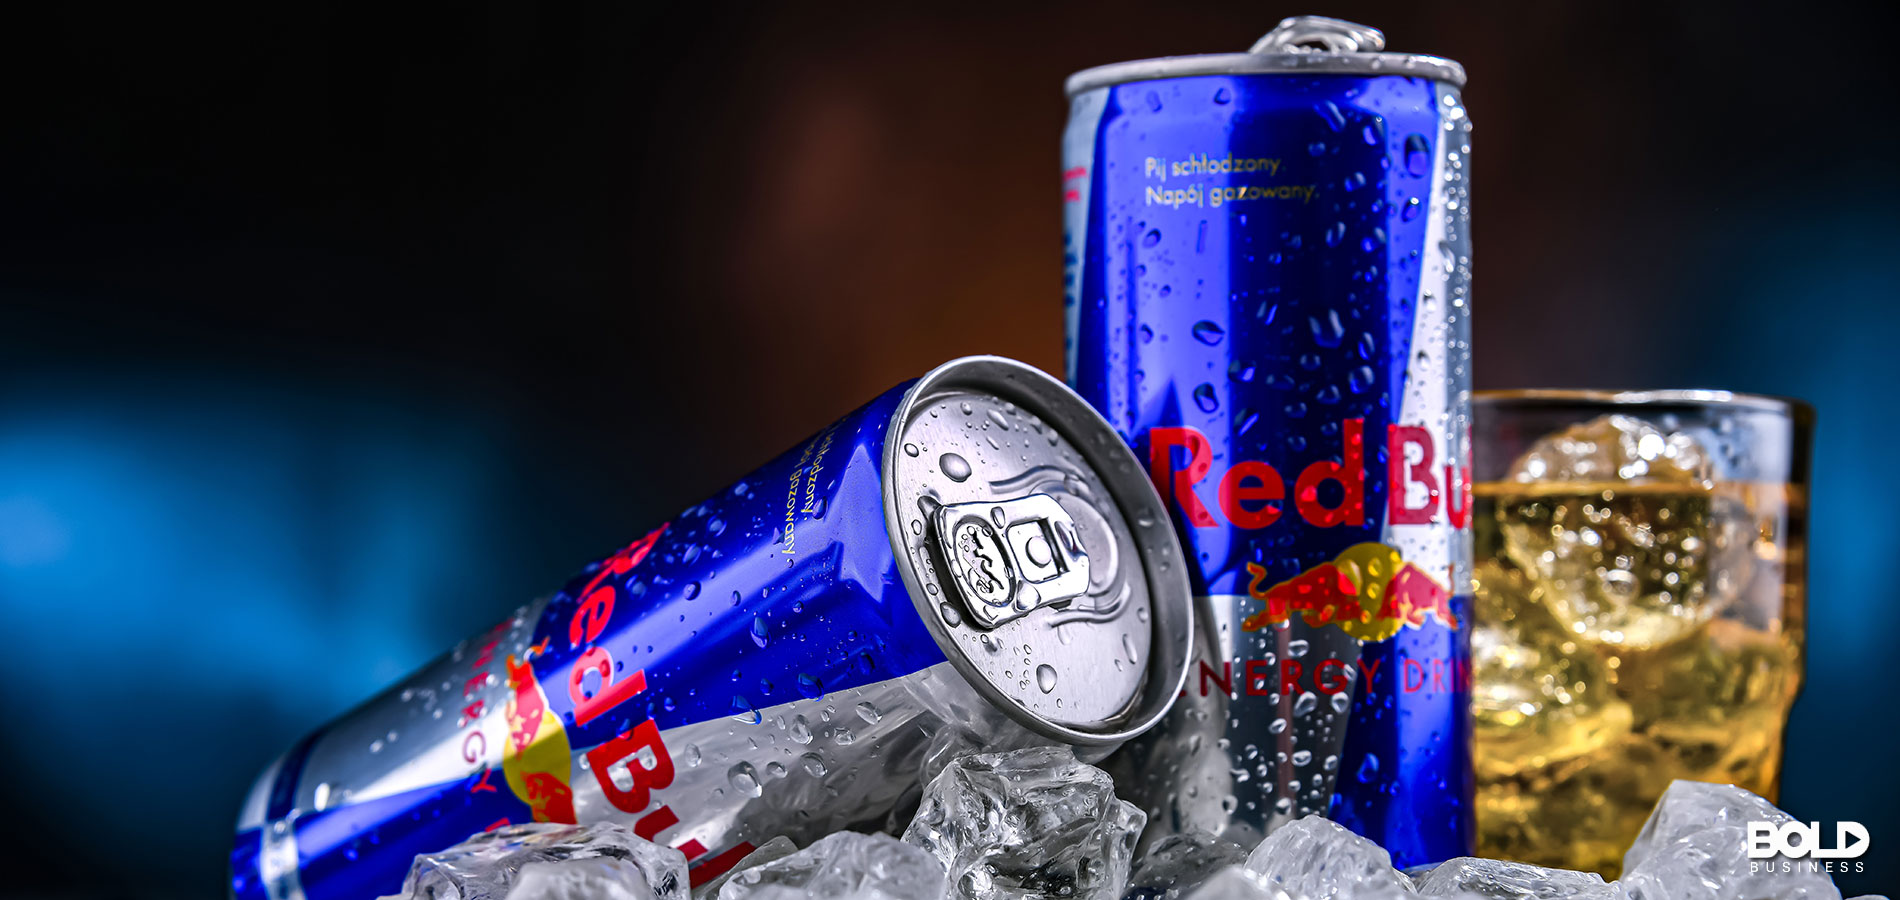 some Red Bulls showing the relationship between taurine and aging